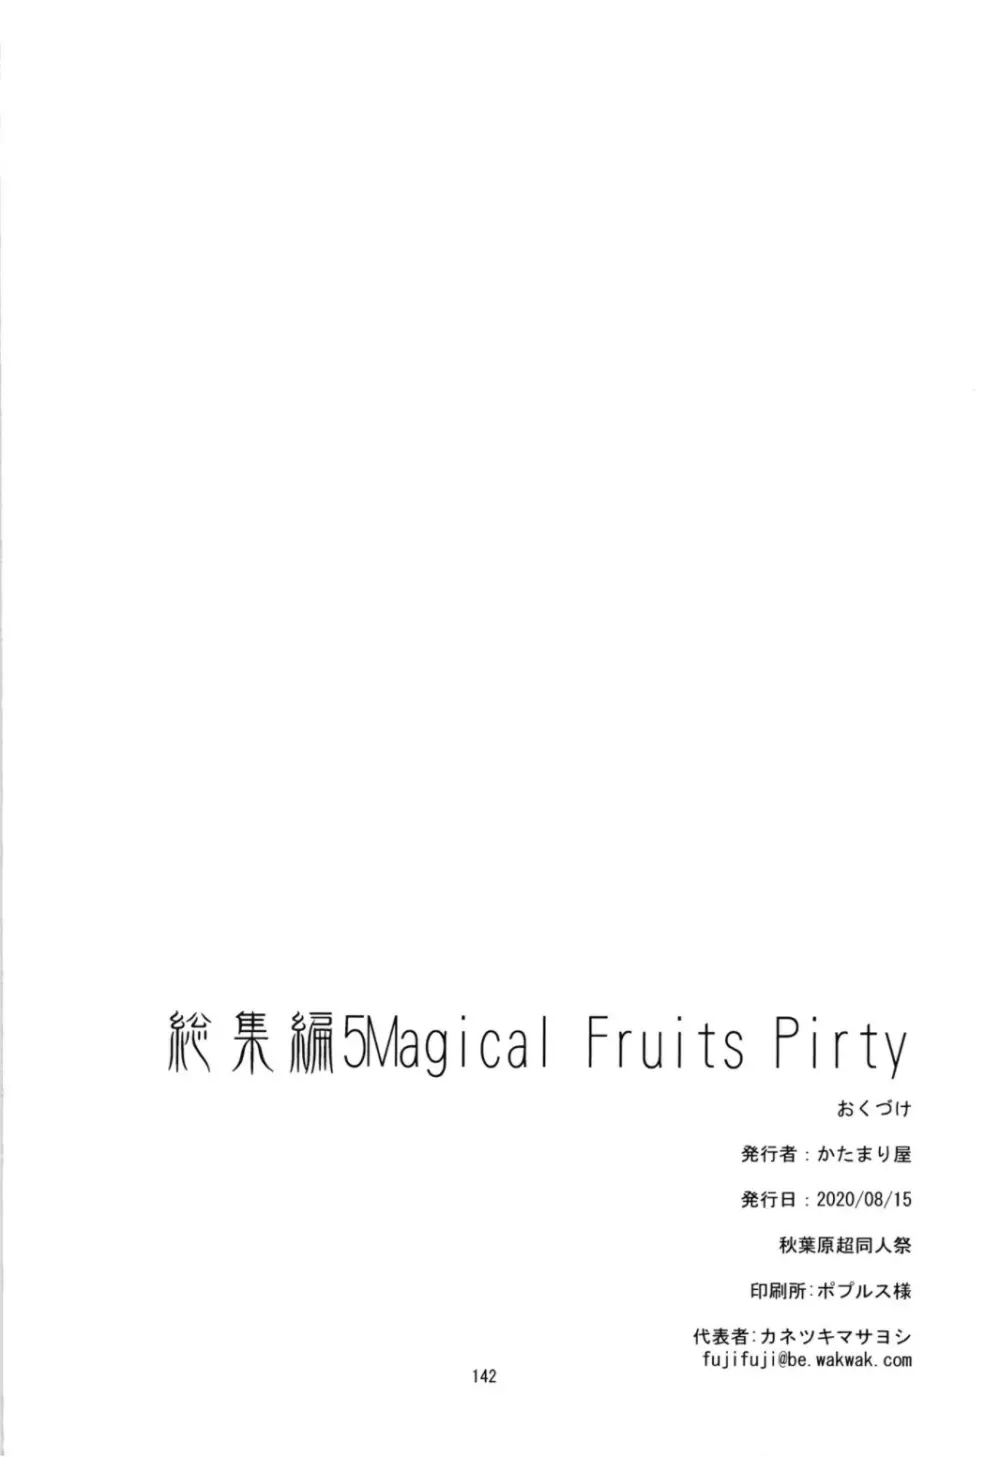 Magical Fruits Party 144ページ